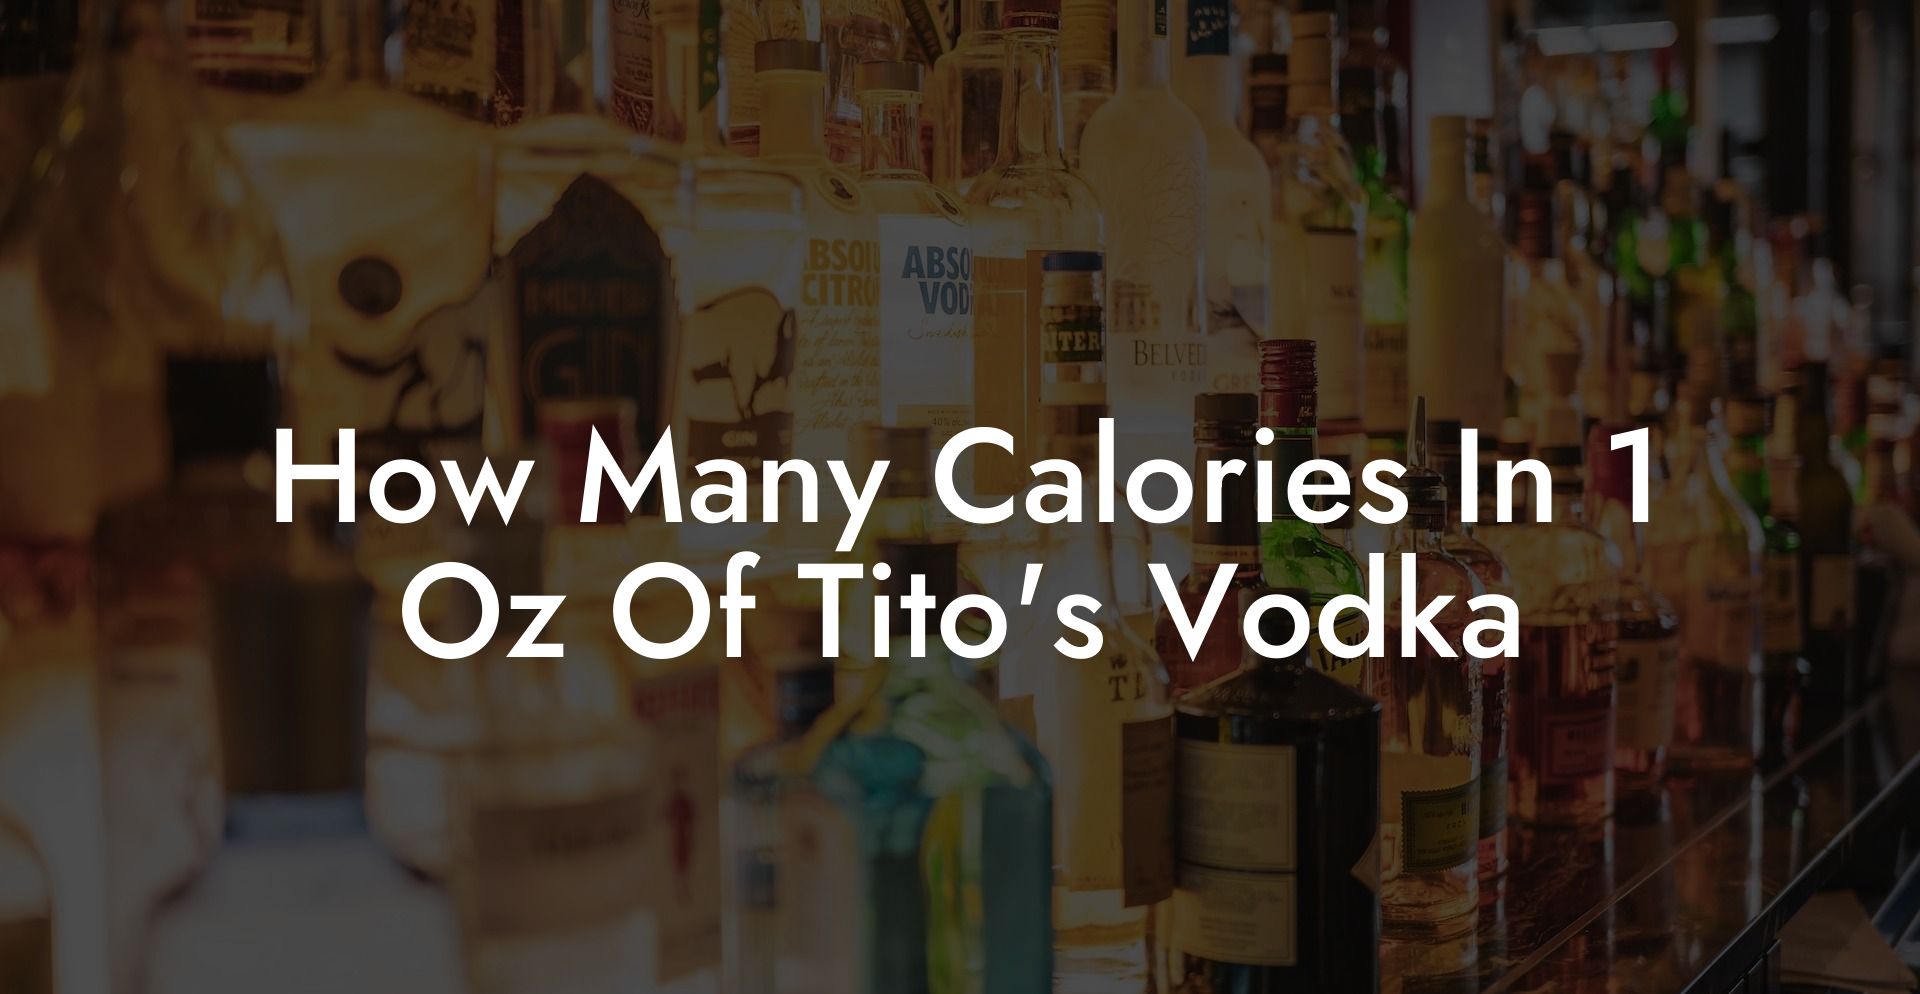 How Many Calories In 1 Oz Of Tito's Vodka